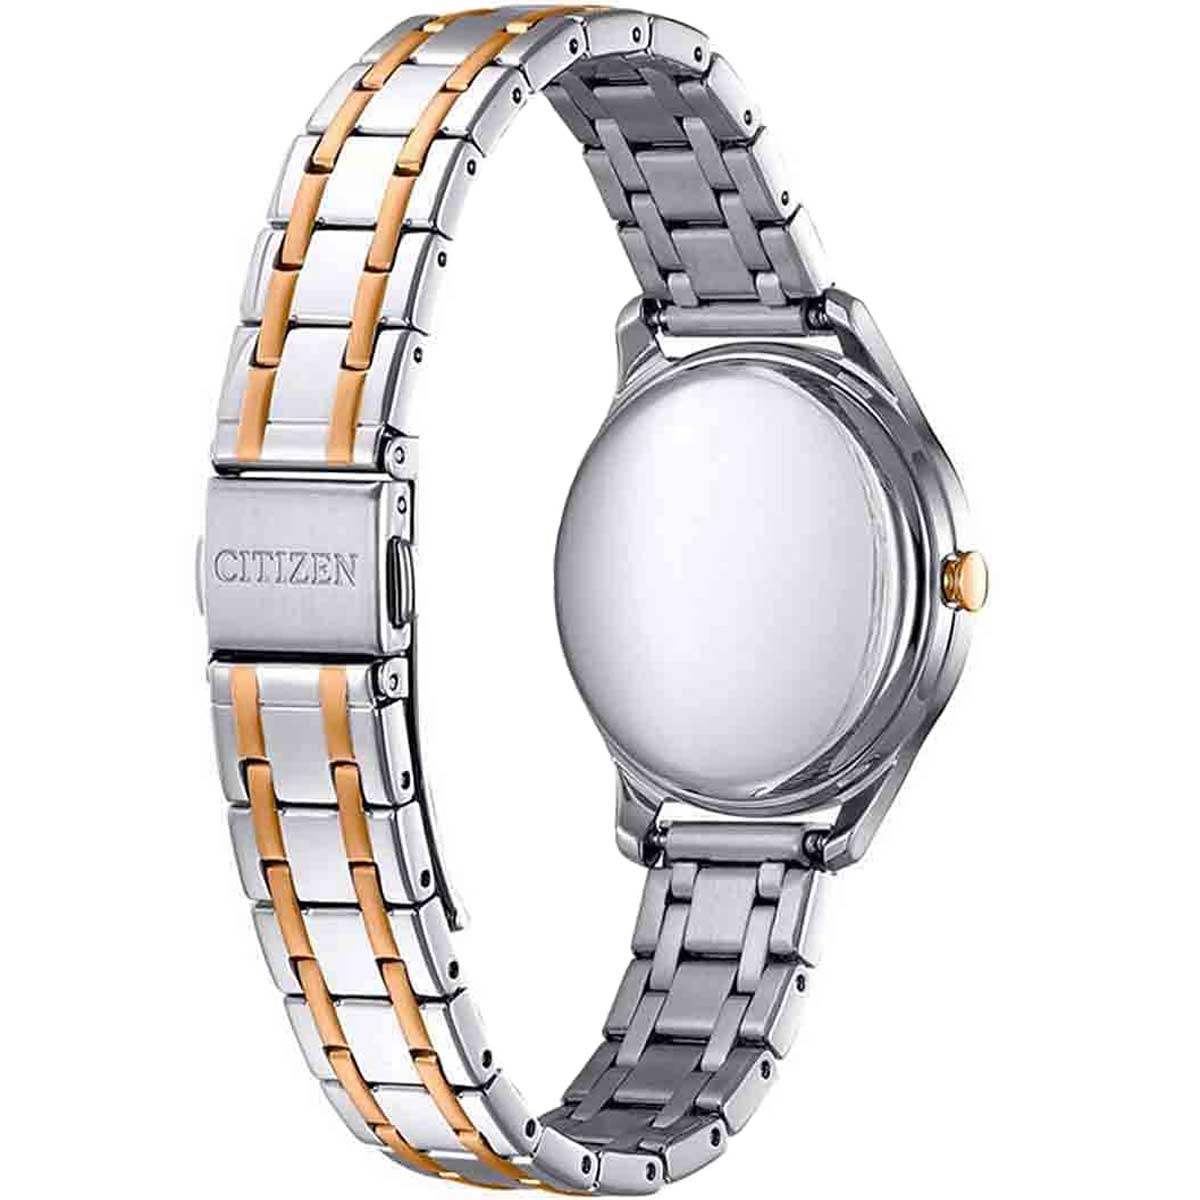 Citizen Eco-Drive Ivory Dial Two-tone Ladies Watch EM0506-77A - image 3 of 3